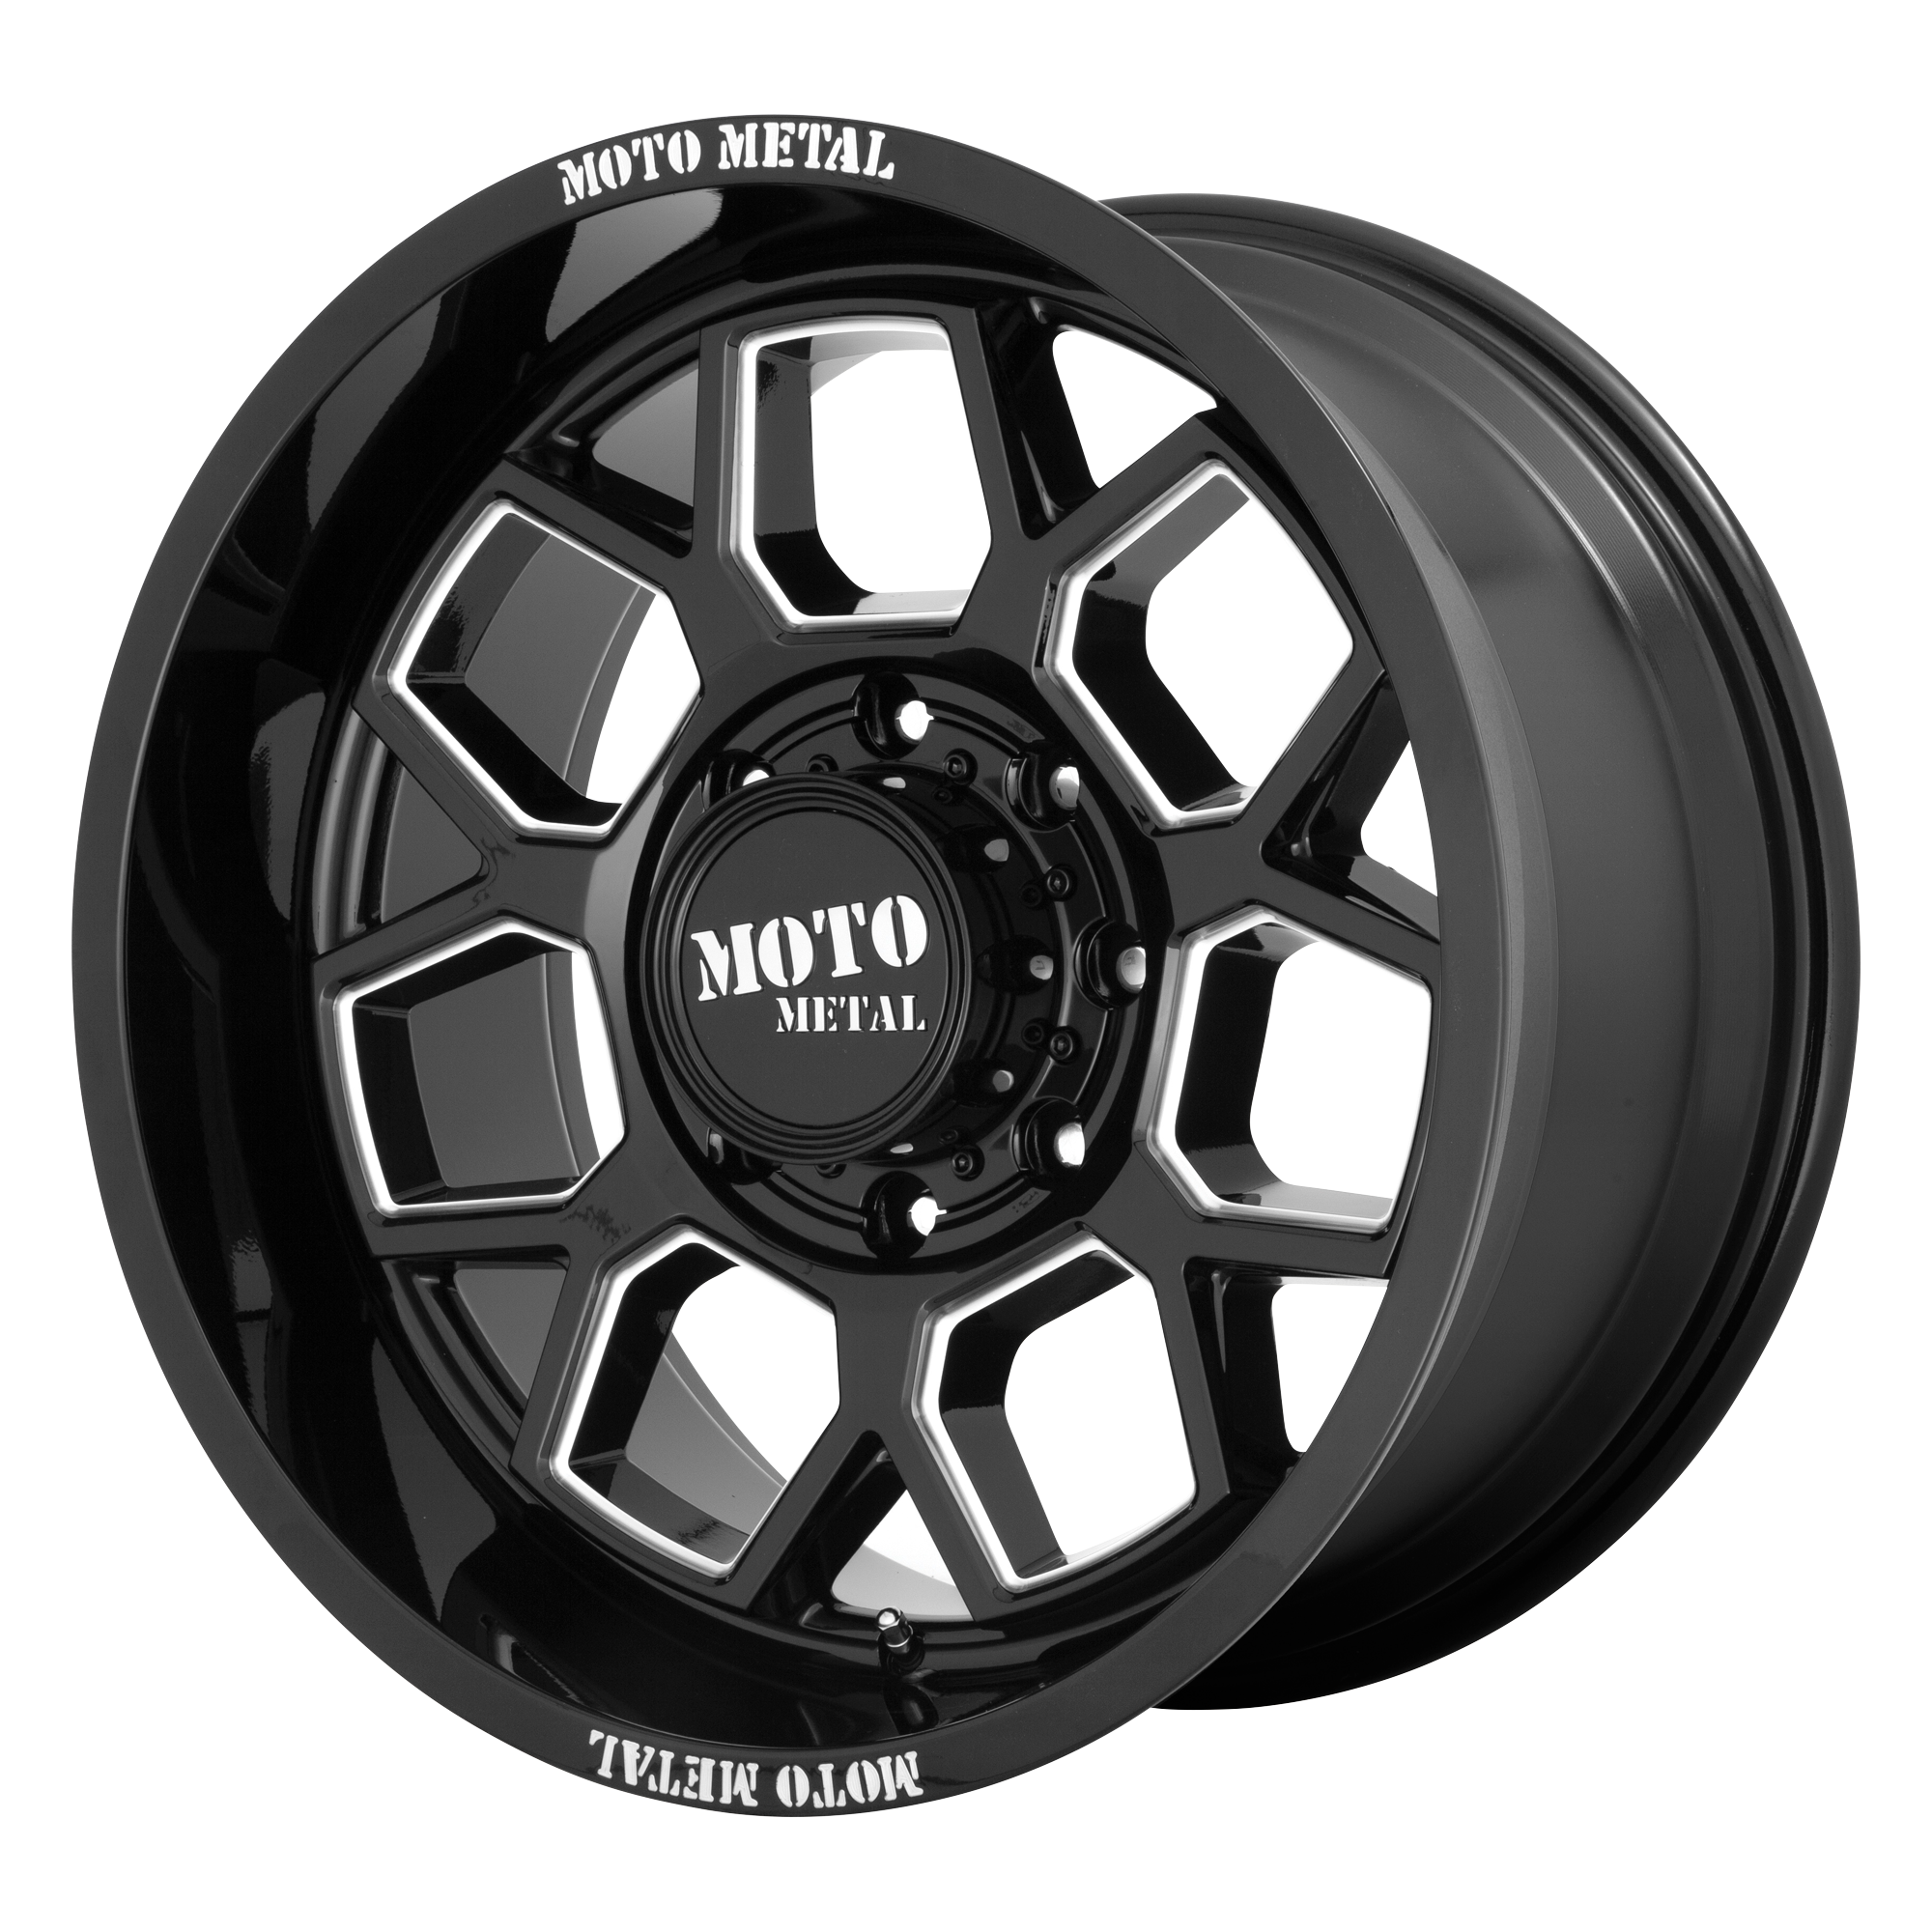 BANSHEE 20x10 5x127.00 GLOSS BLACK MILLED (-18 mm) - Tires and Engine Performance